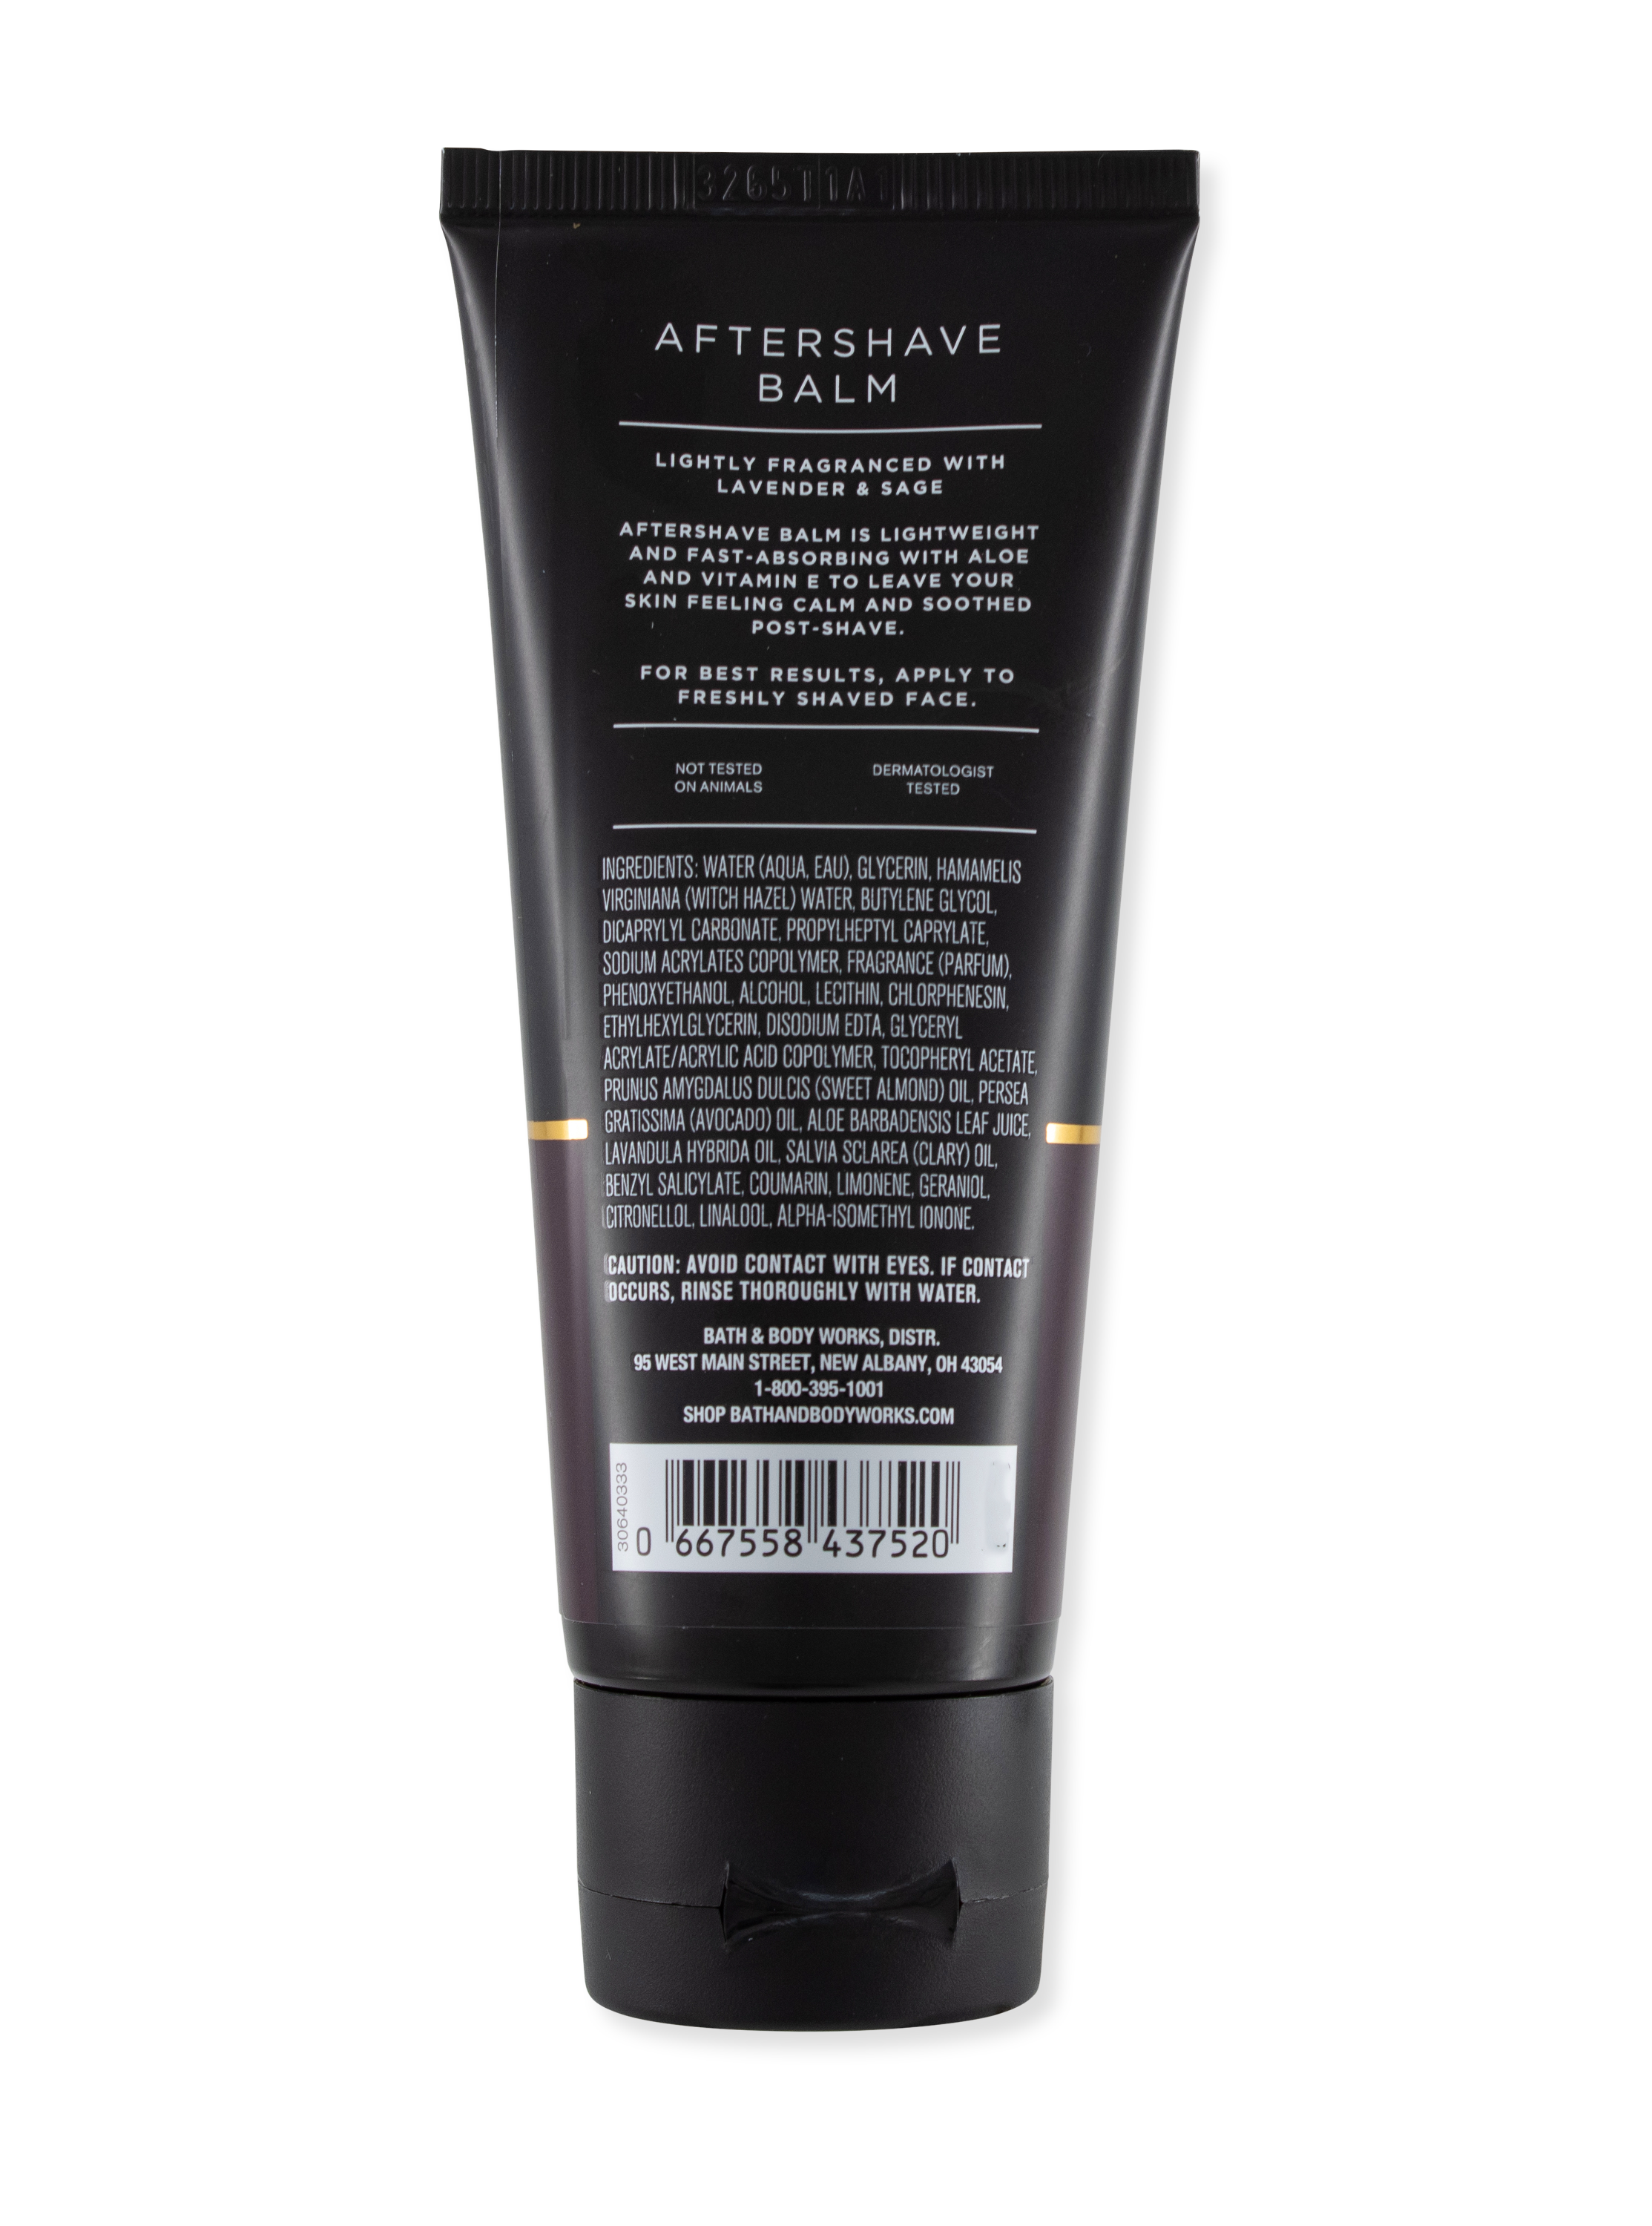 Aftershave balm with aloe & vitamin E - for men - 100ml